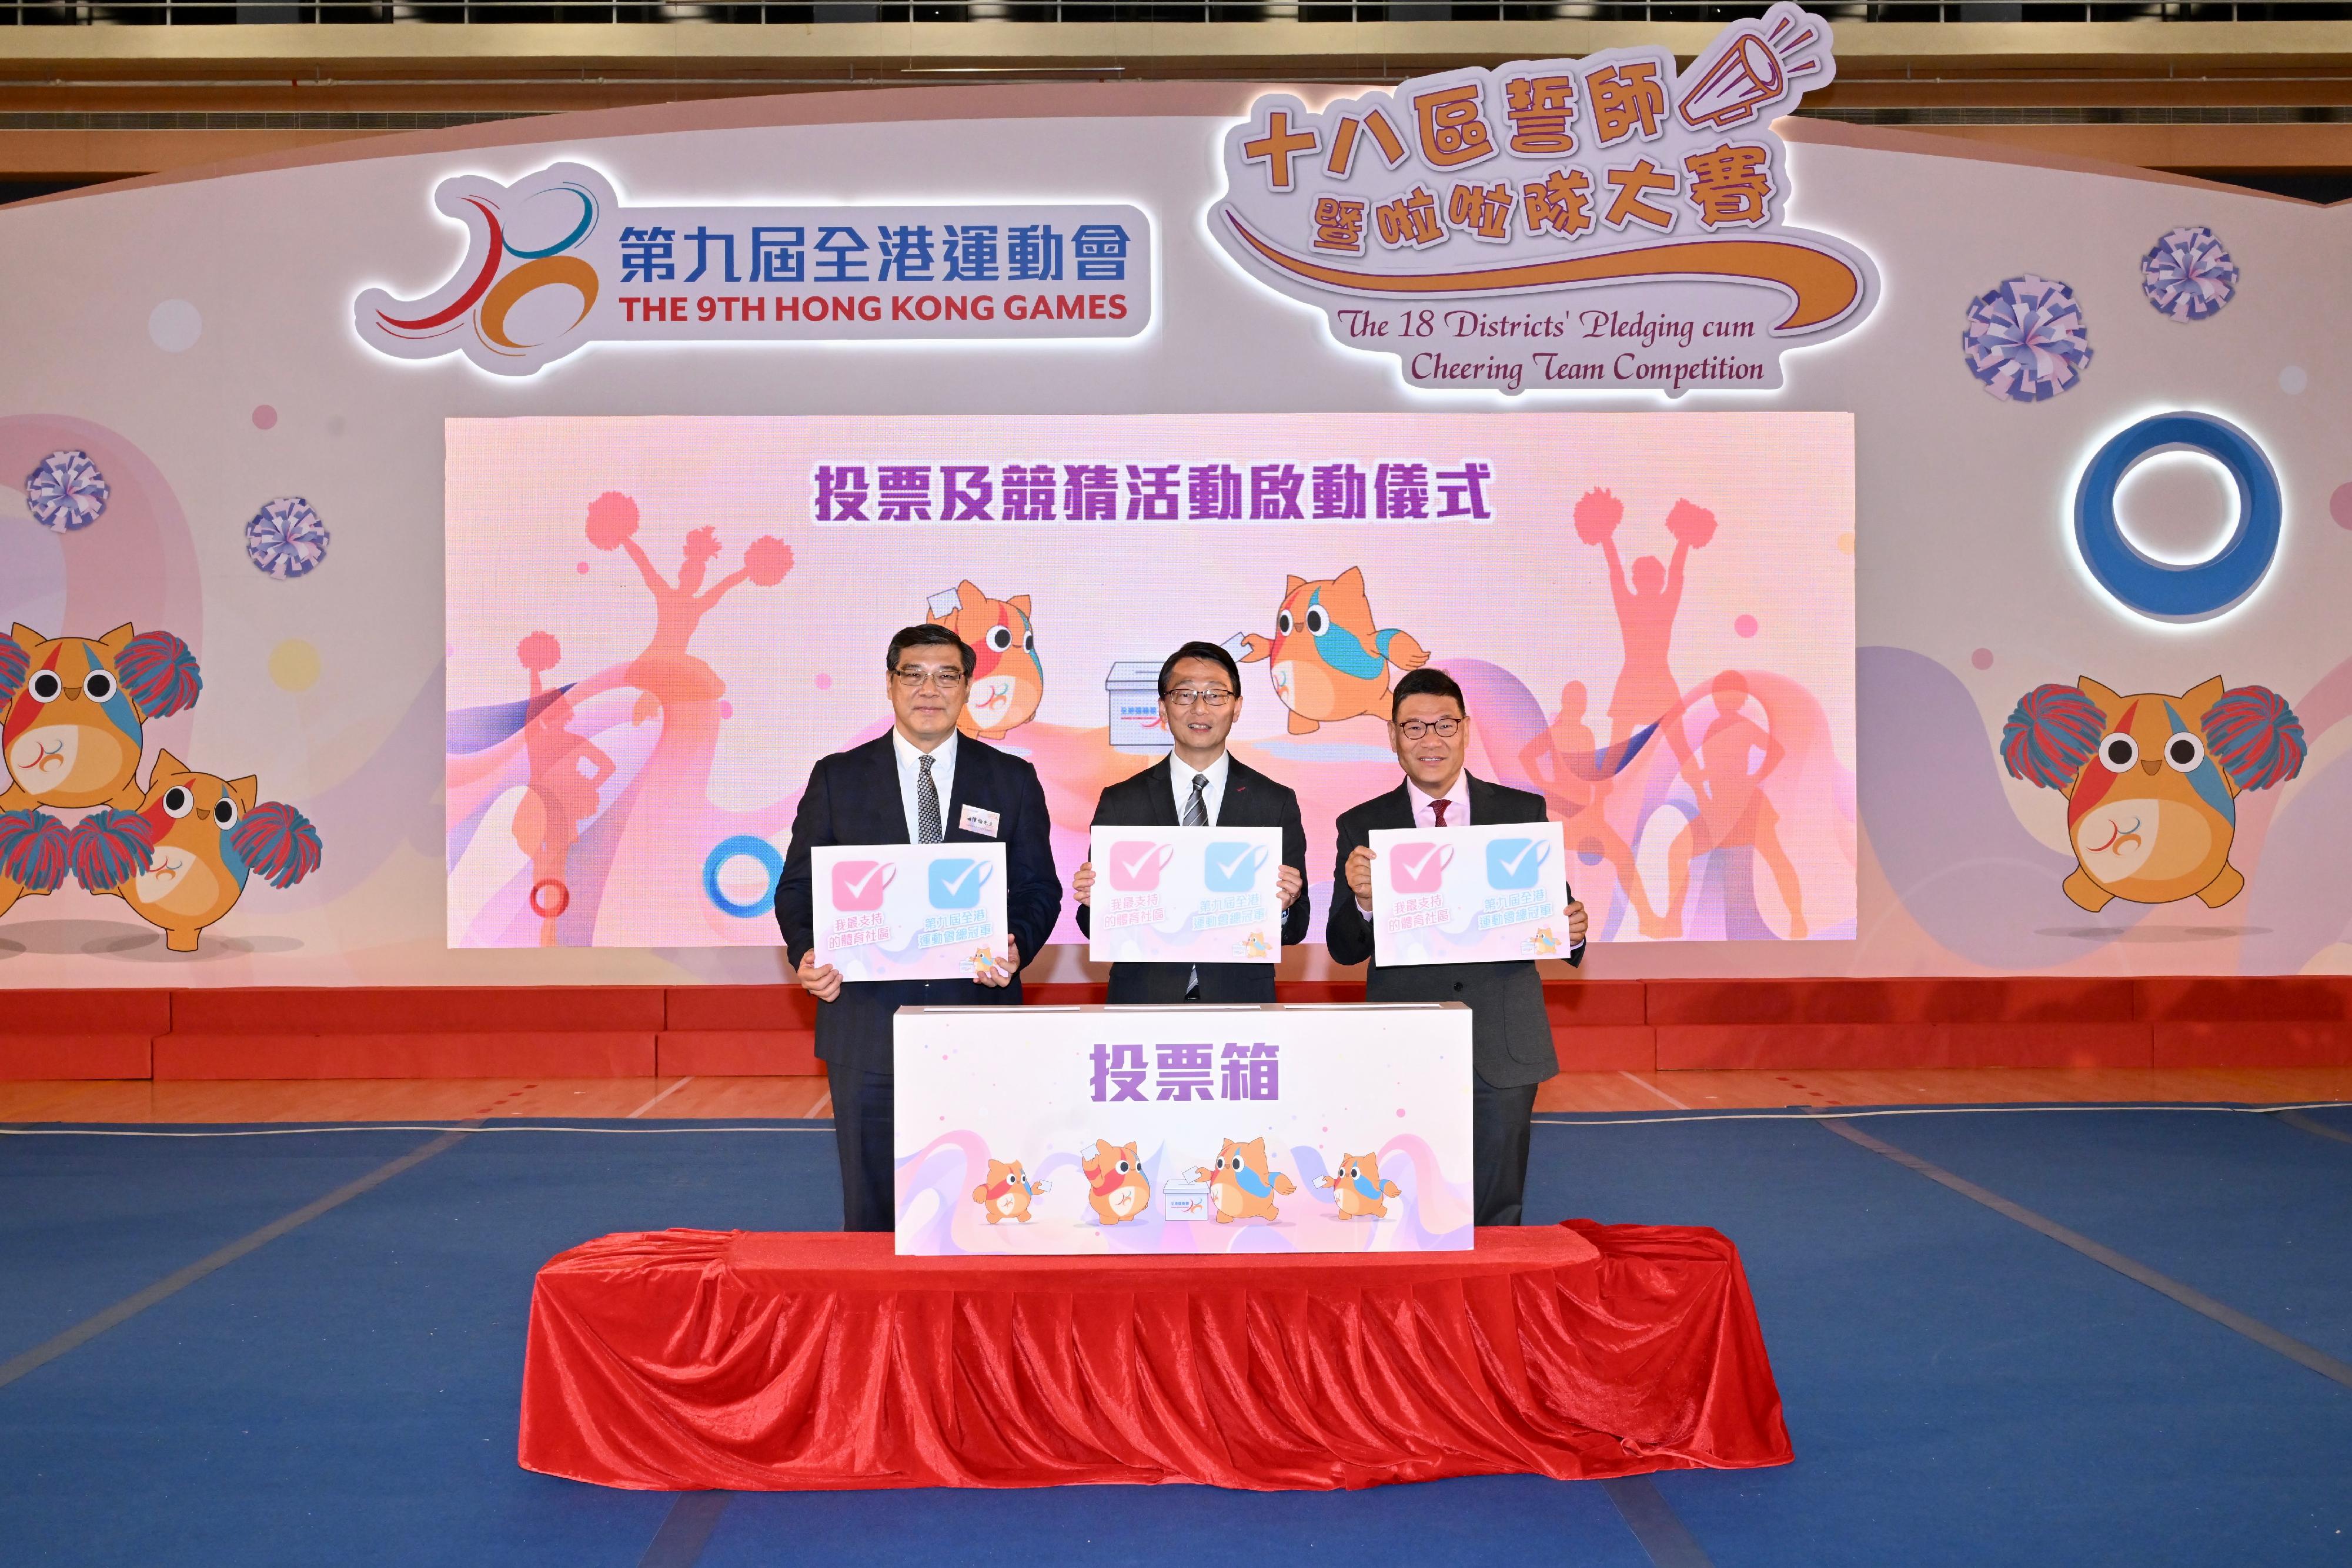 The Director of Leisure and Cultural Services, Mr Vincent Liu (centre), and the Executive Advisers of the 9th Hong Kong Games (HKG) Organising Committee, Mr William Tong (left) and Mr David Yip (right), officiate at the launching ceremony of voting and guessing activities of the 9th HKG today (February 25).